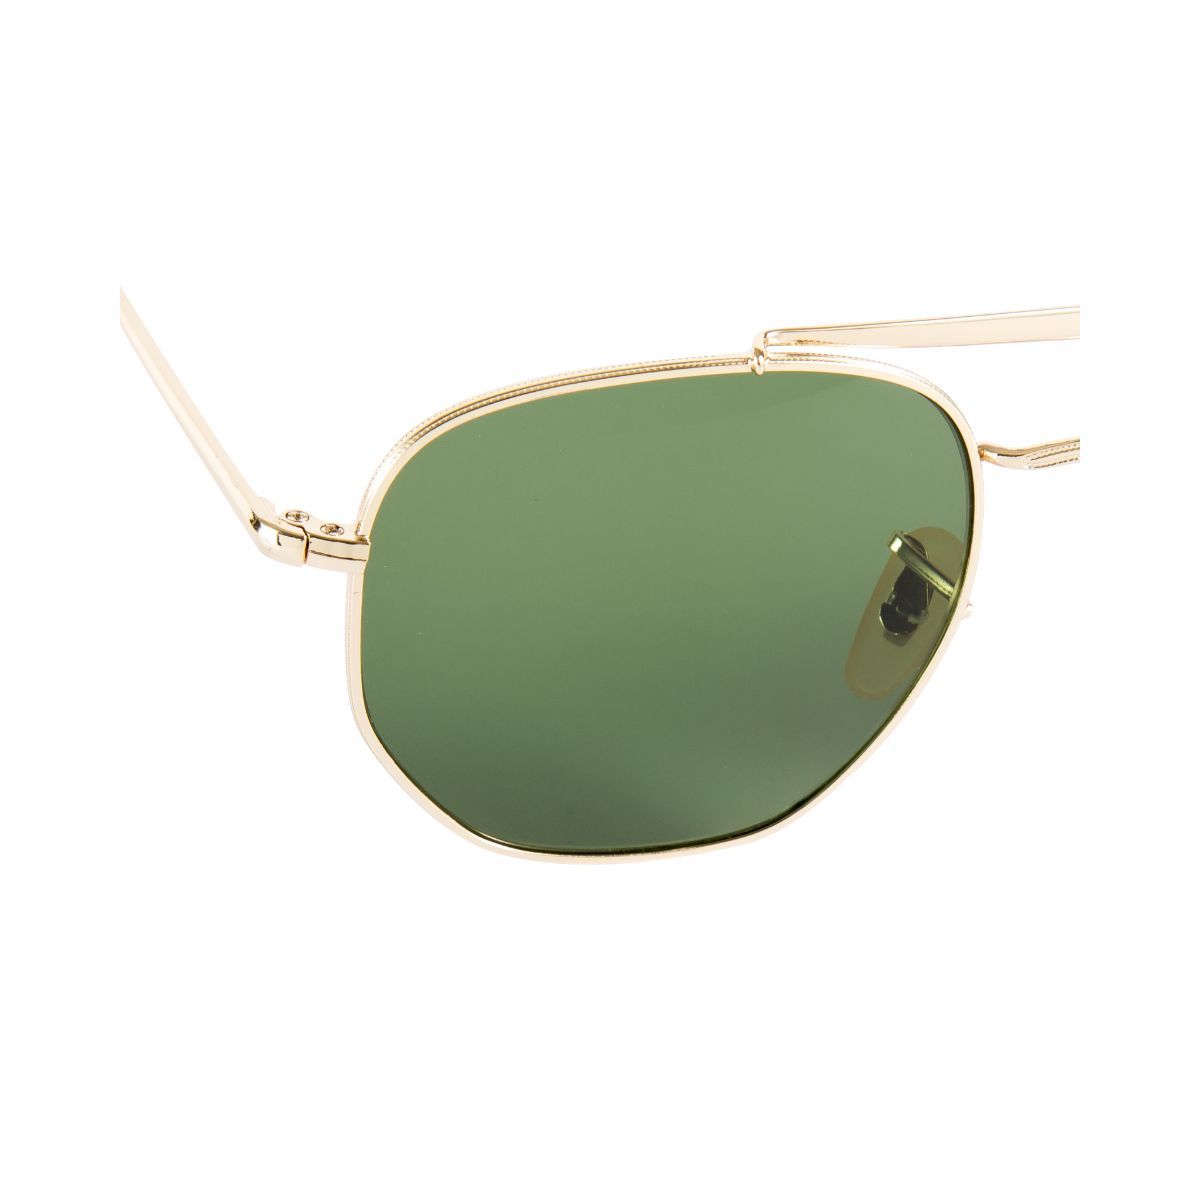 Buy GIO COLLECTION UV Protected Round Unisex Sunglasses online